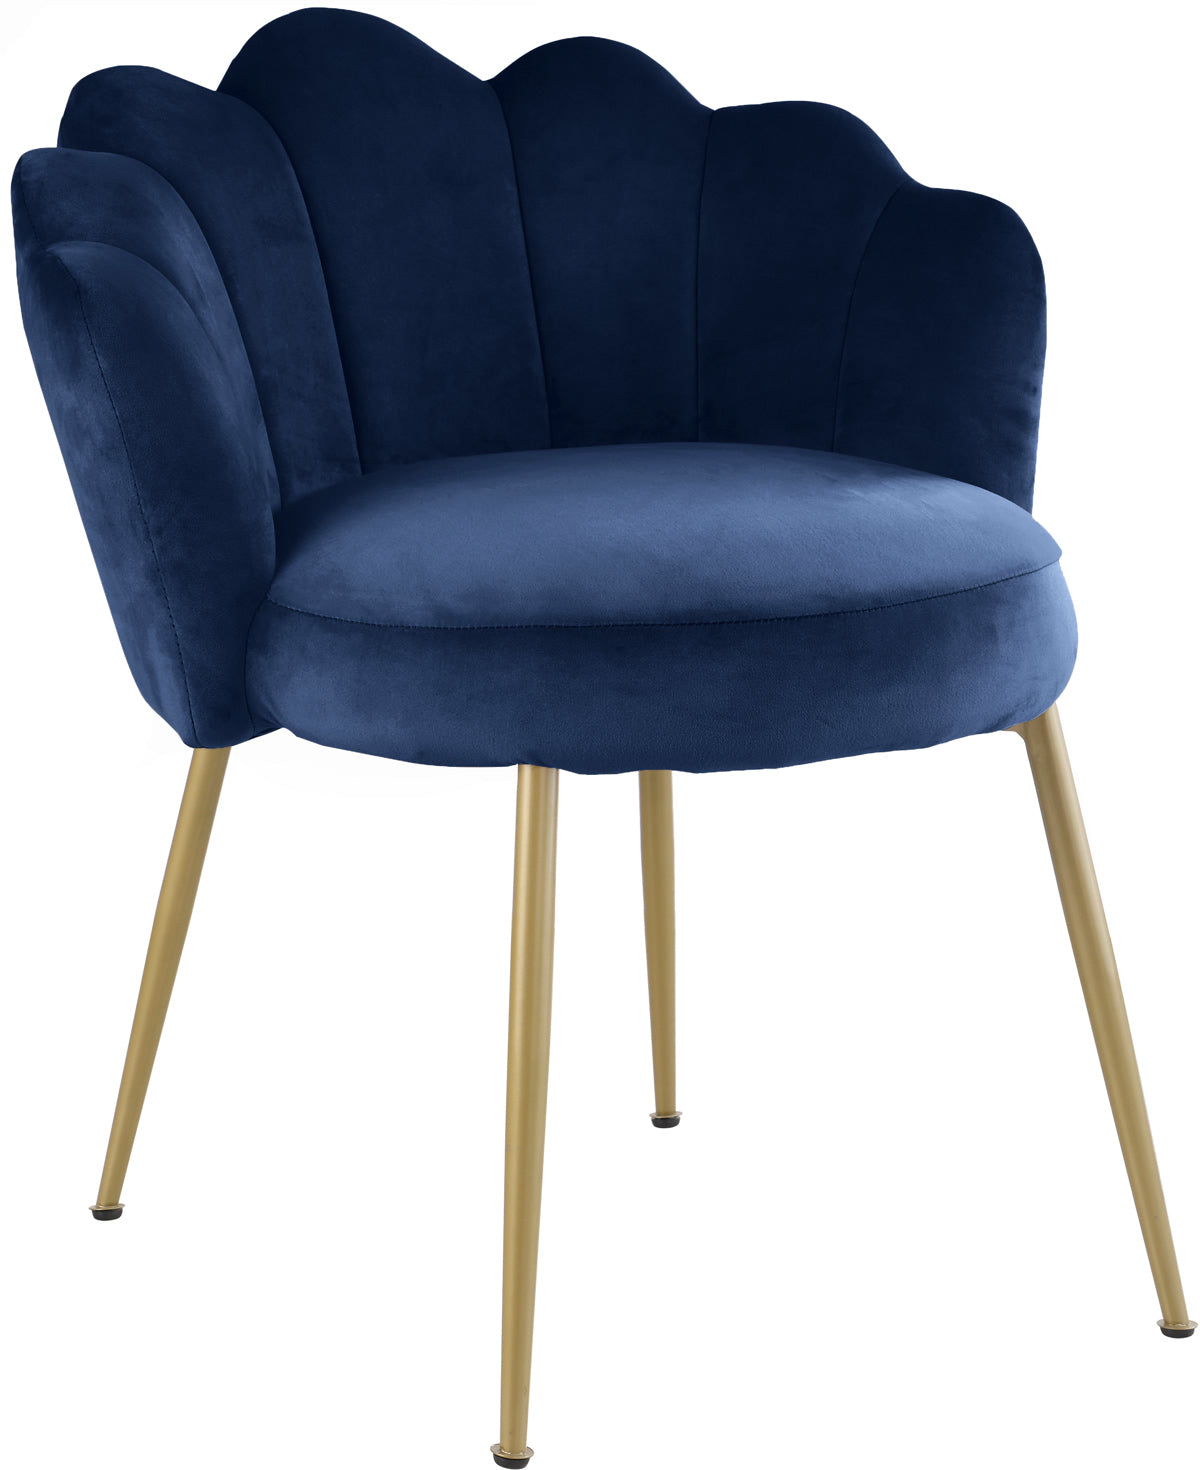 Meridian Furniture Claire Navy Velvet Dining Chair - Set of 2